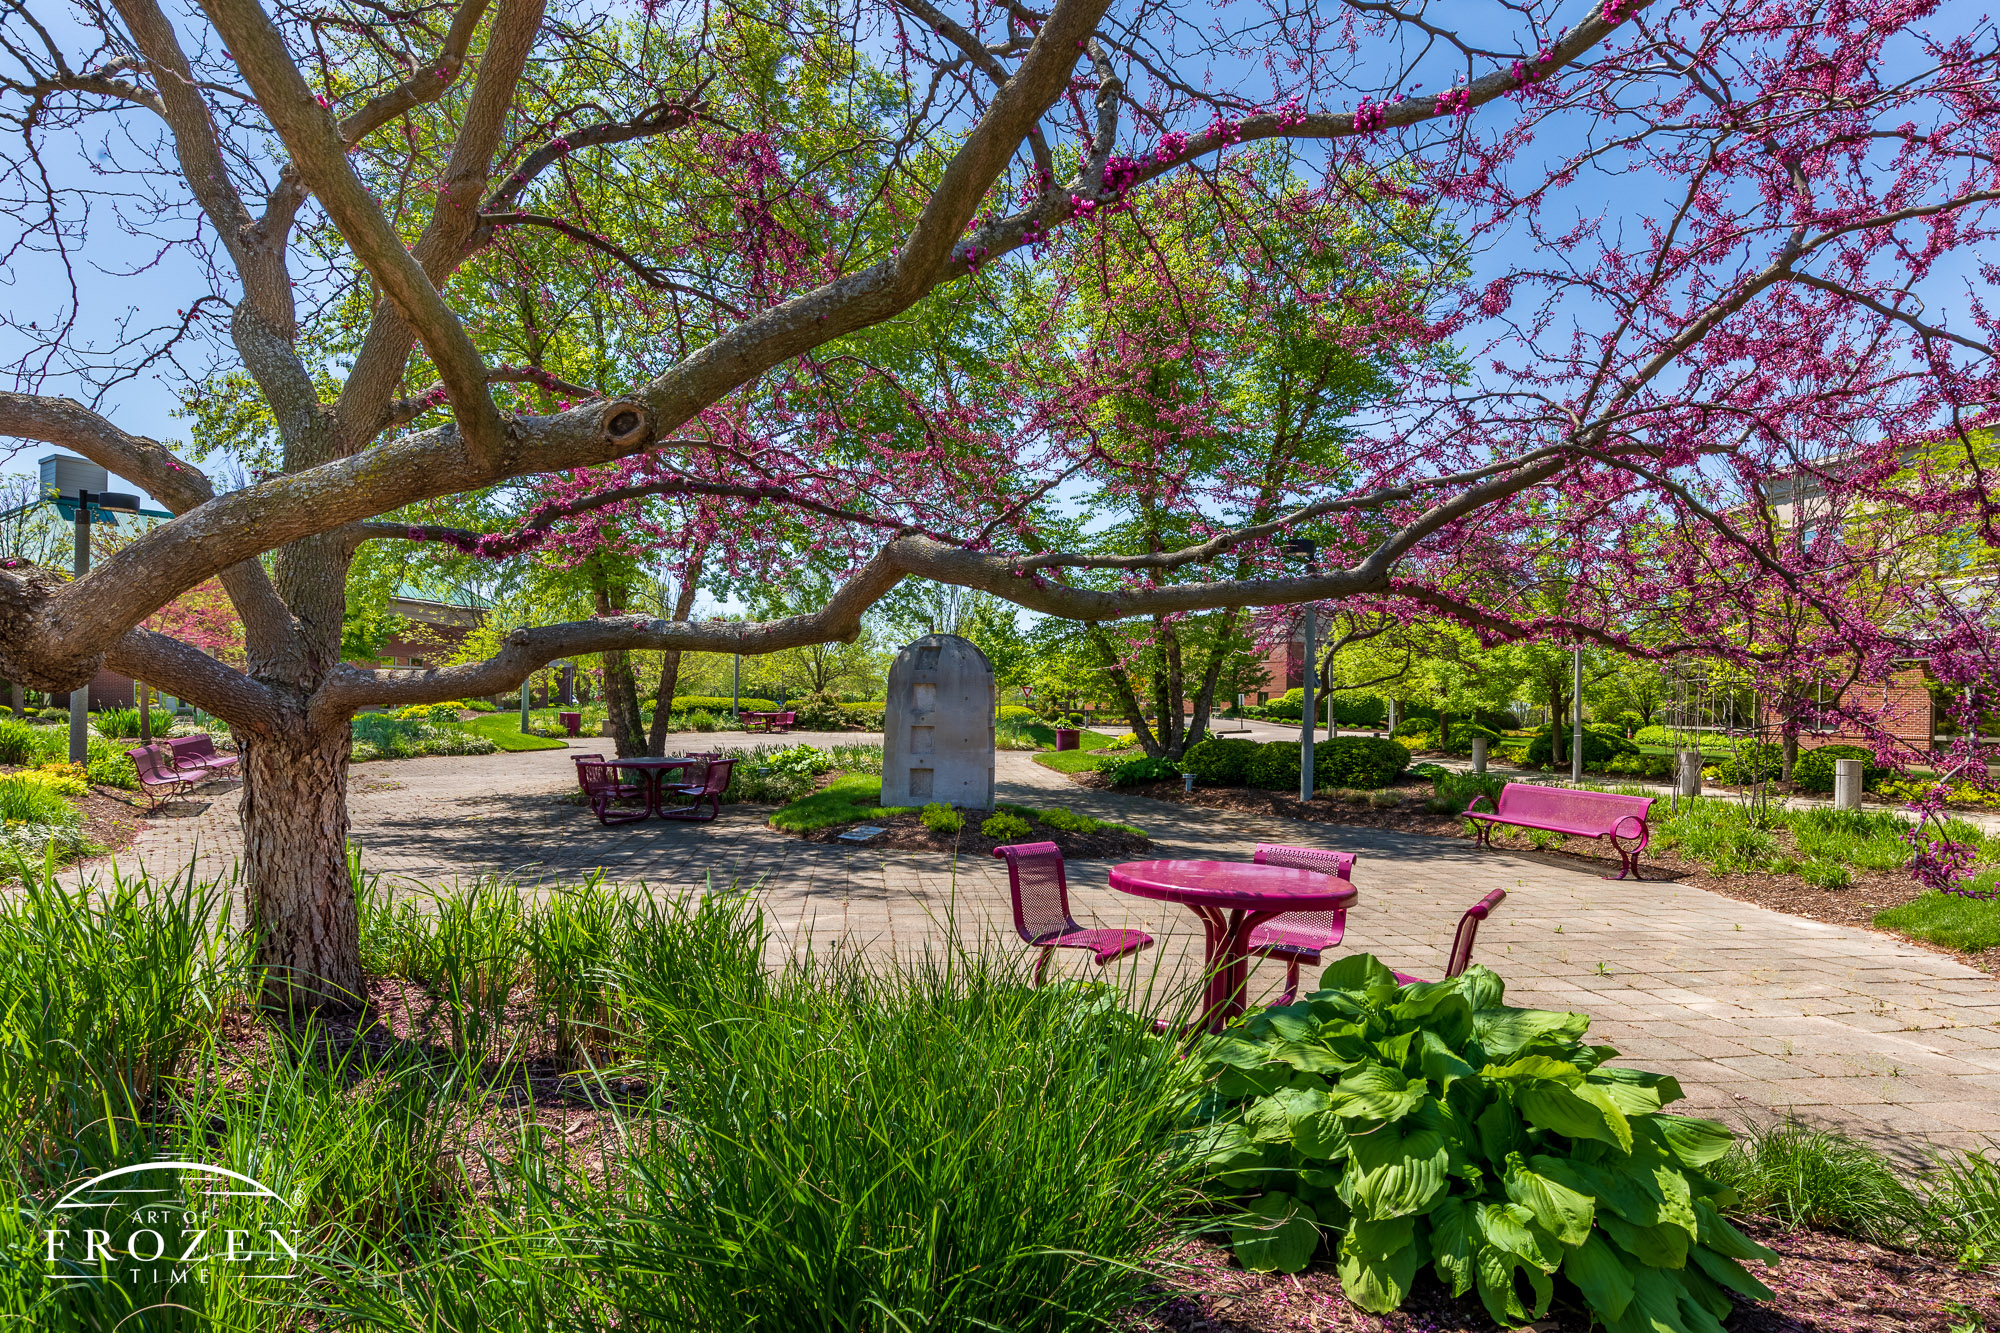 A small garden whose patio chairs and benches match the color of the Eastern Red Bud blooms